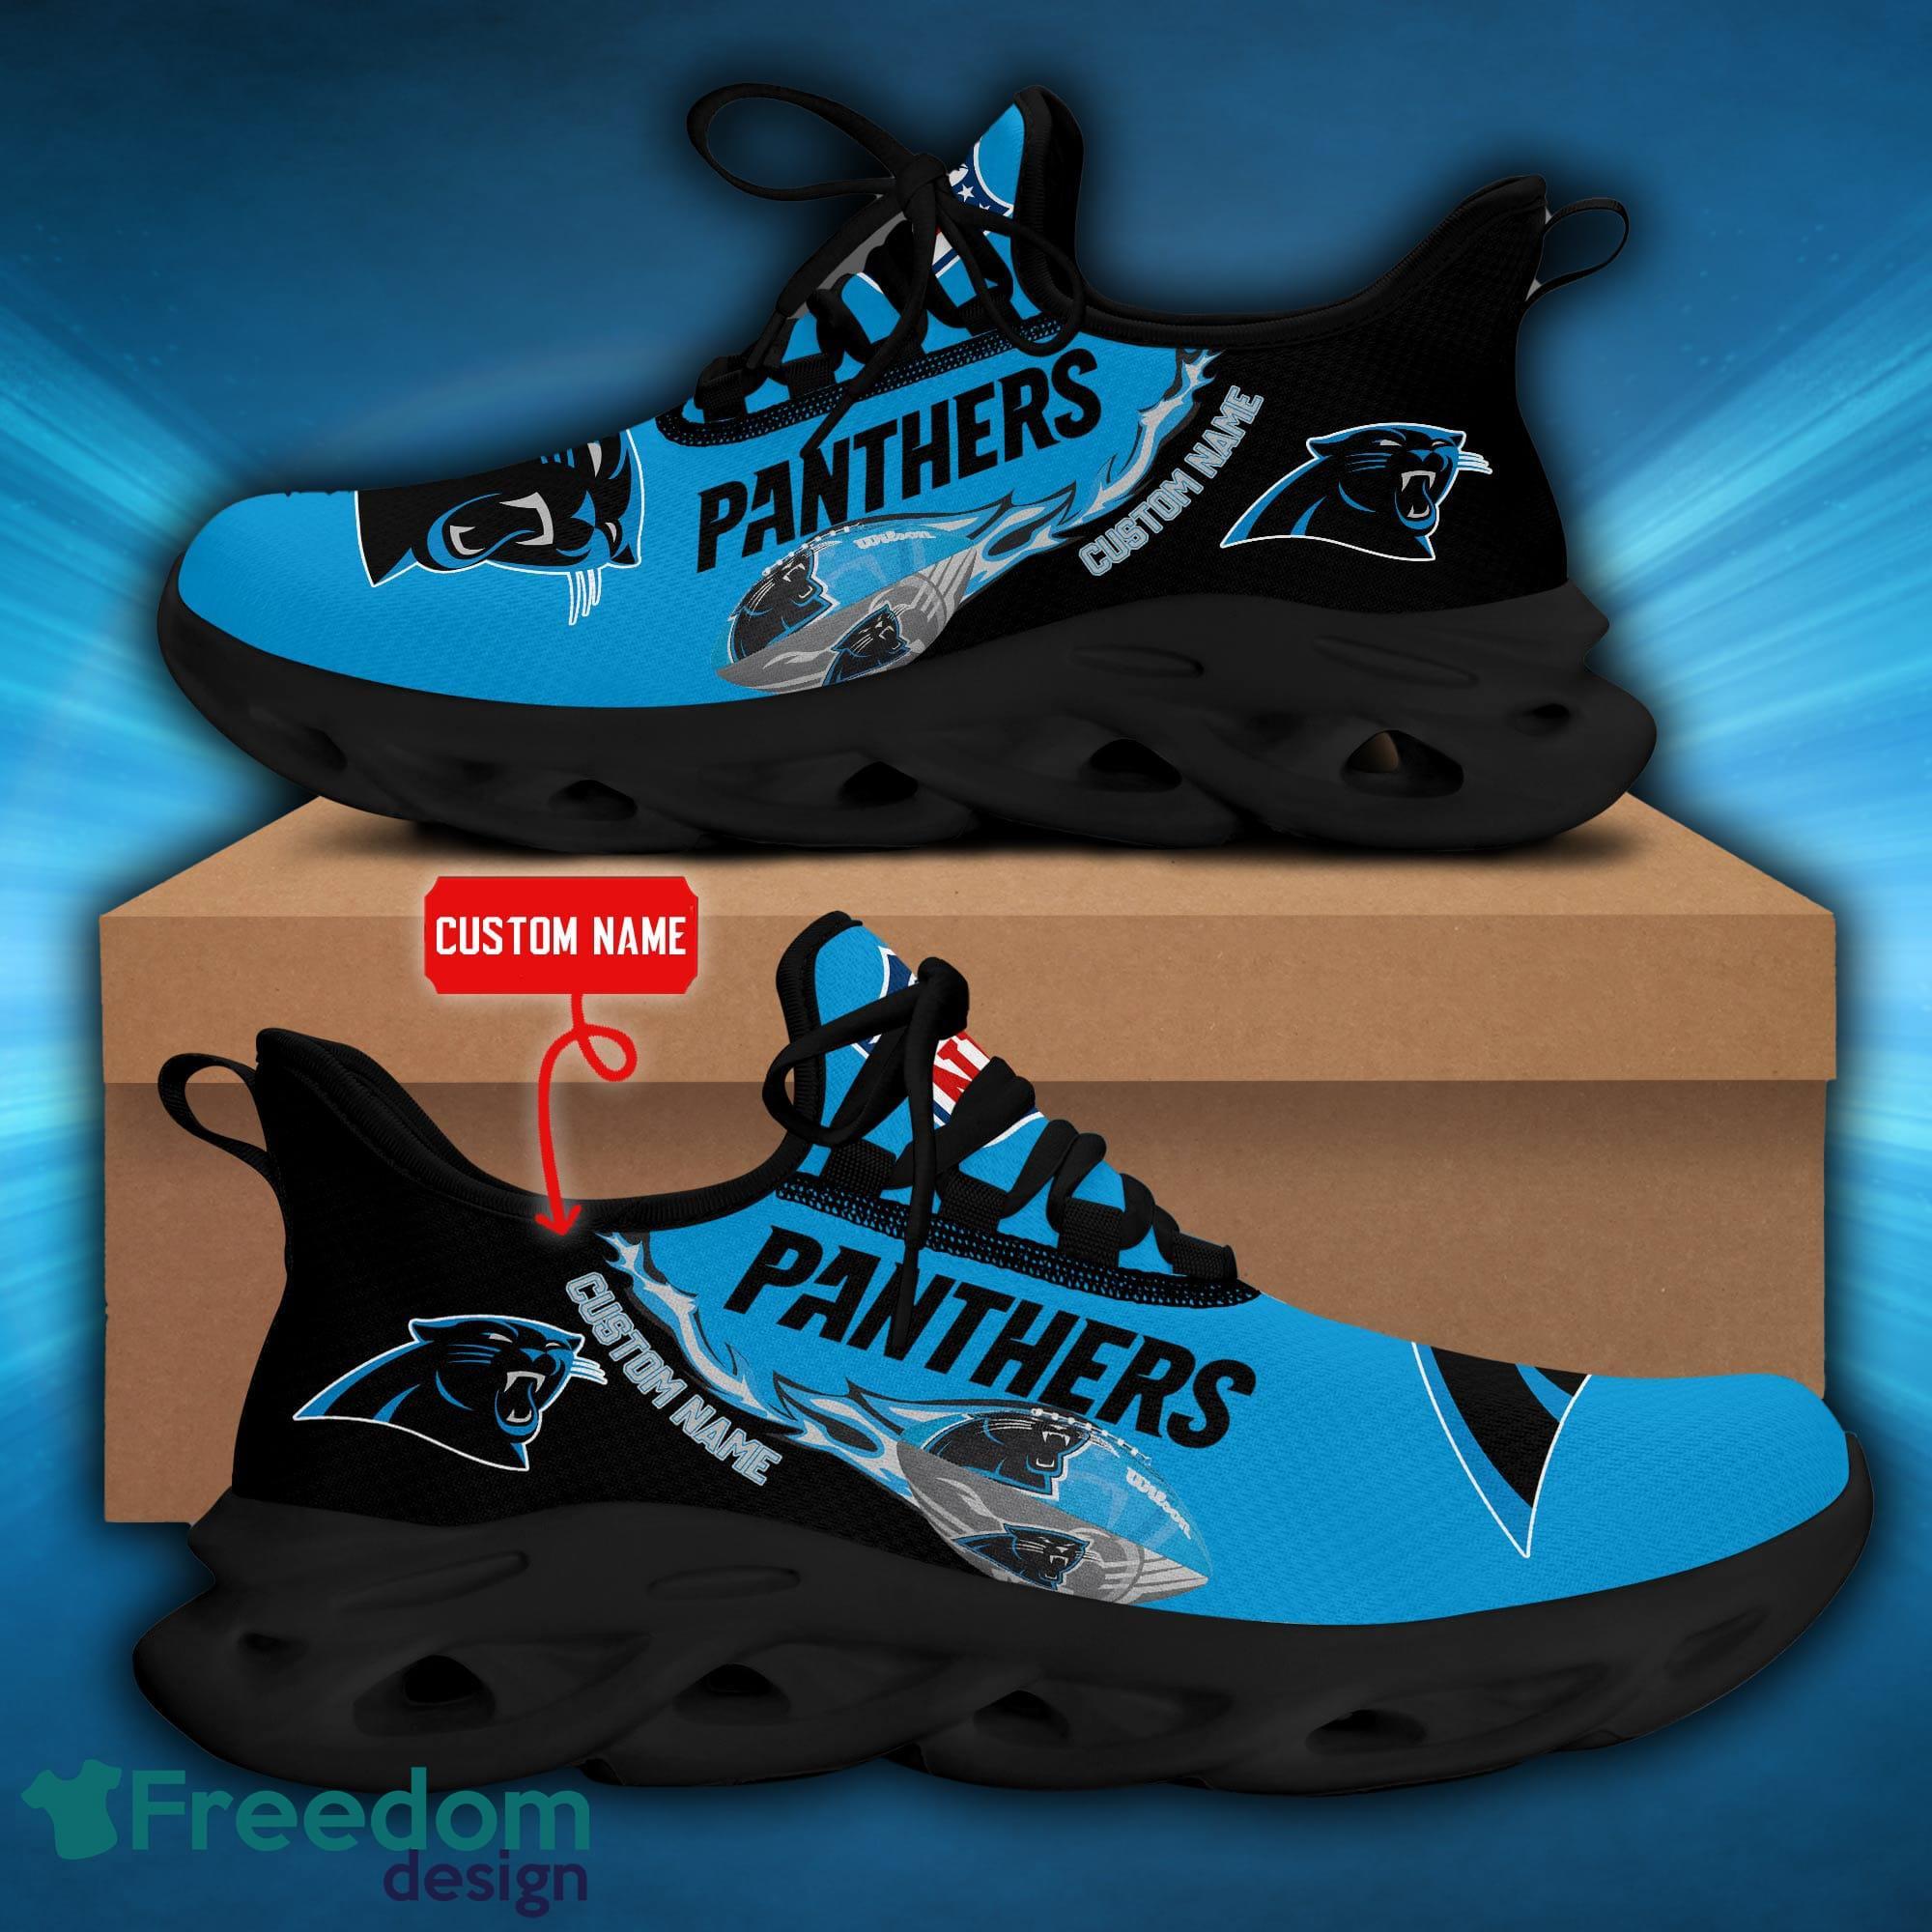 Carolina Panthers NFL Shoes Sport Design Yeezy Sneakers For Men